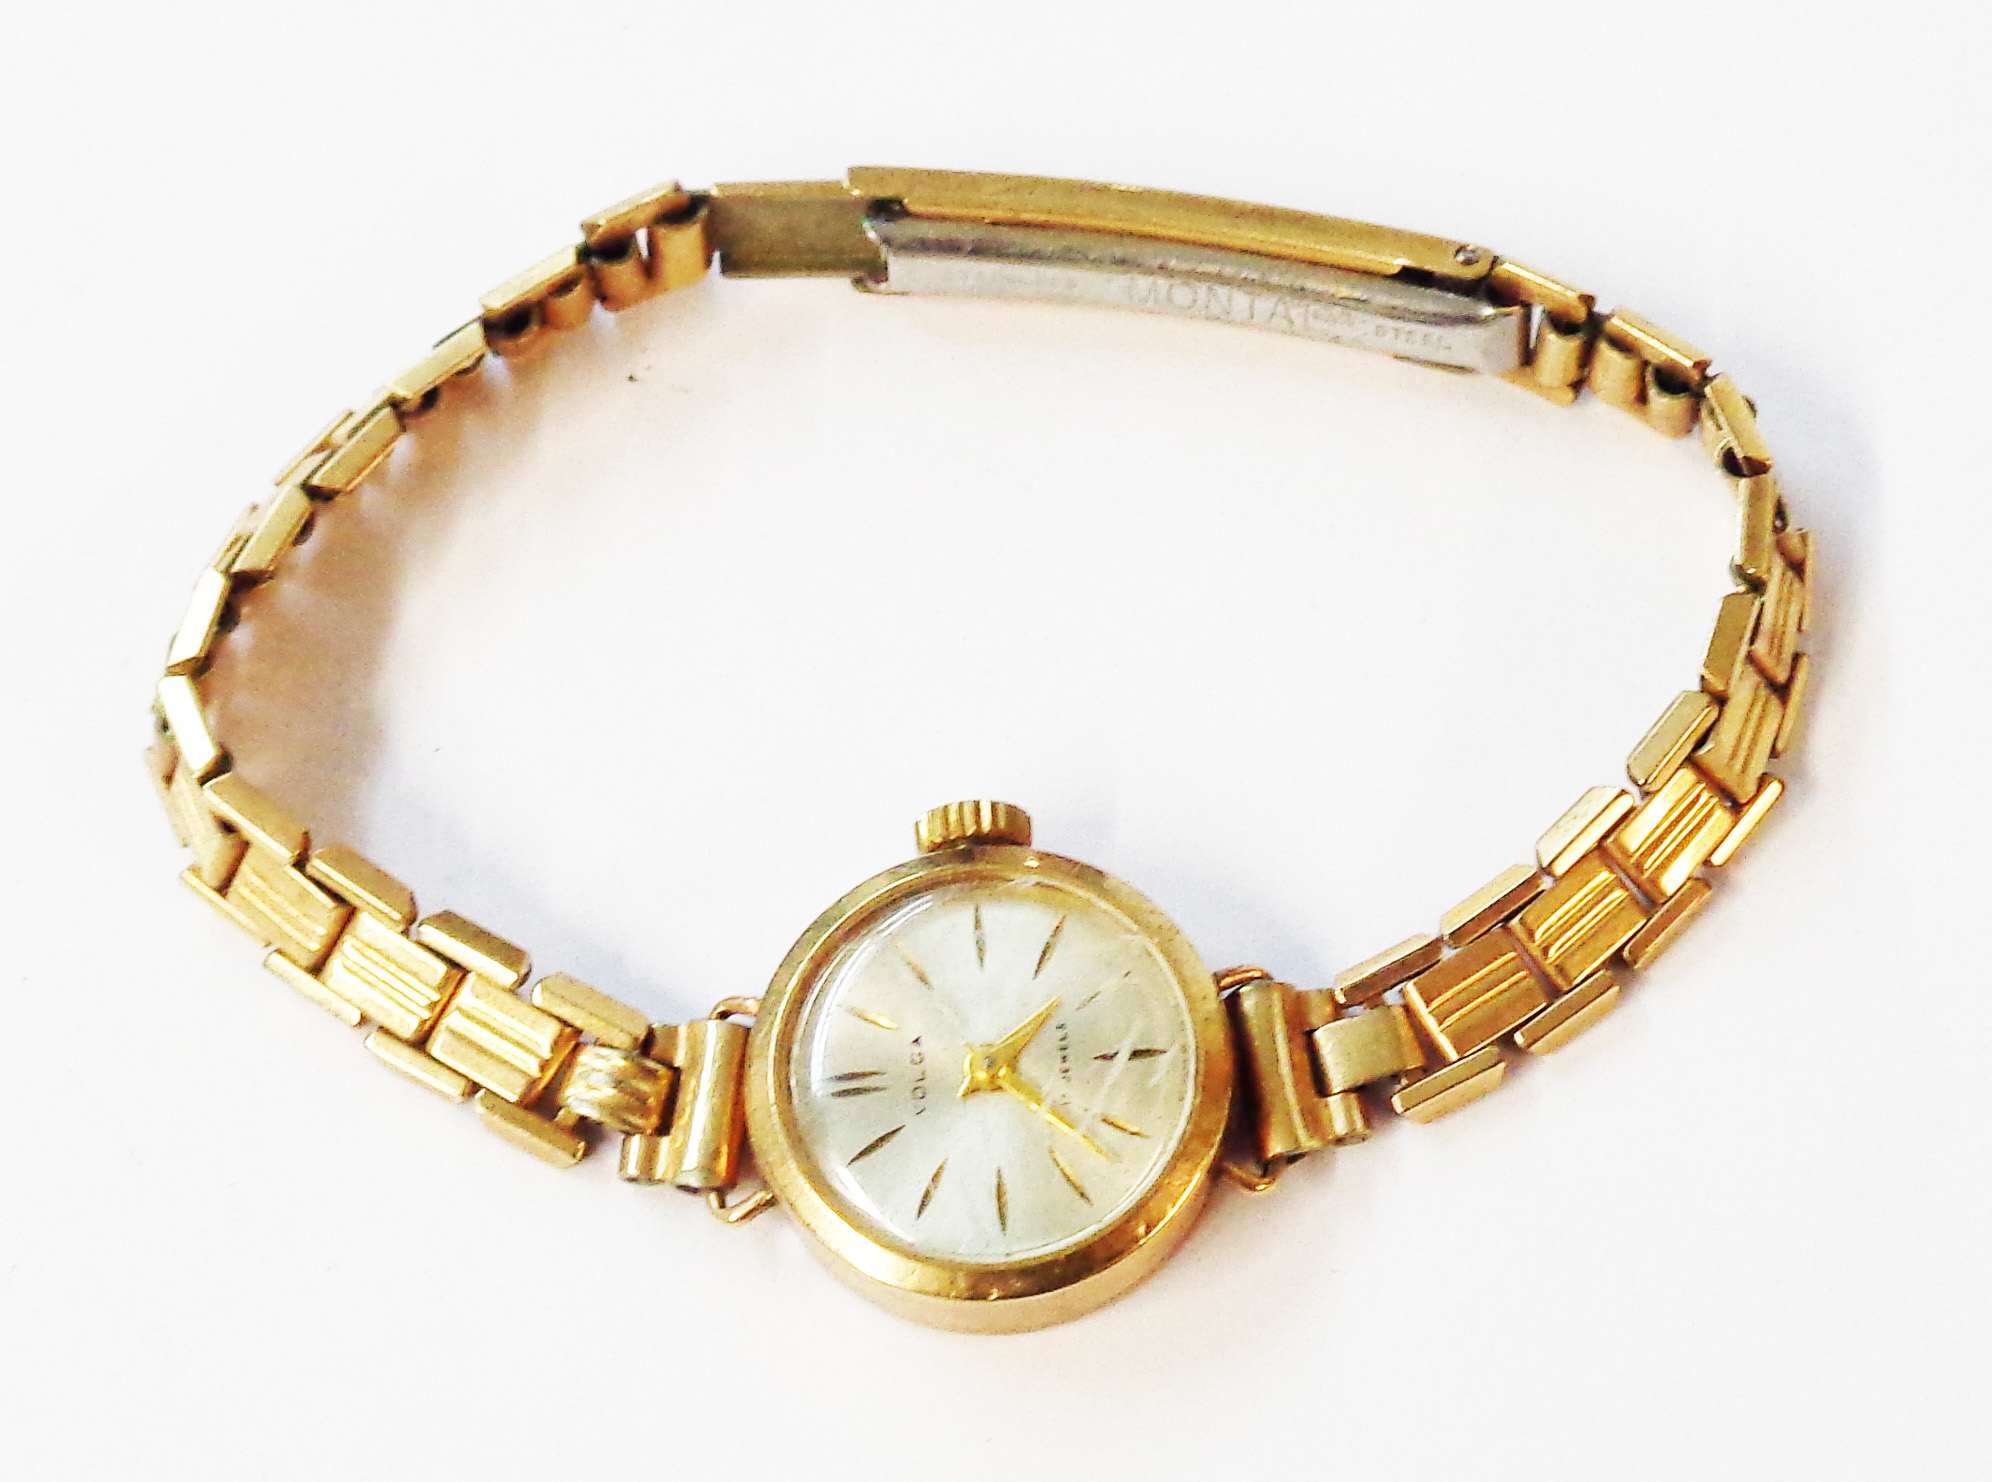 A 1989 Volga 375 (9ct.) gold cased lady's wristwatch, on gold plated bracelet - in associated